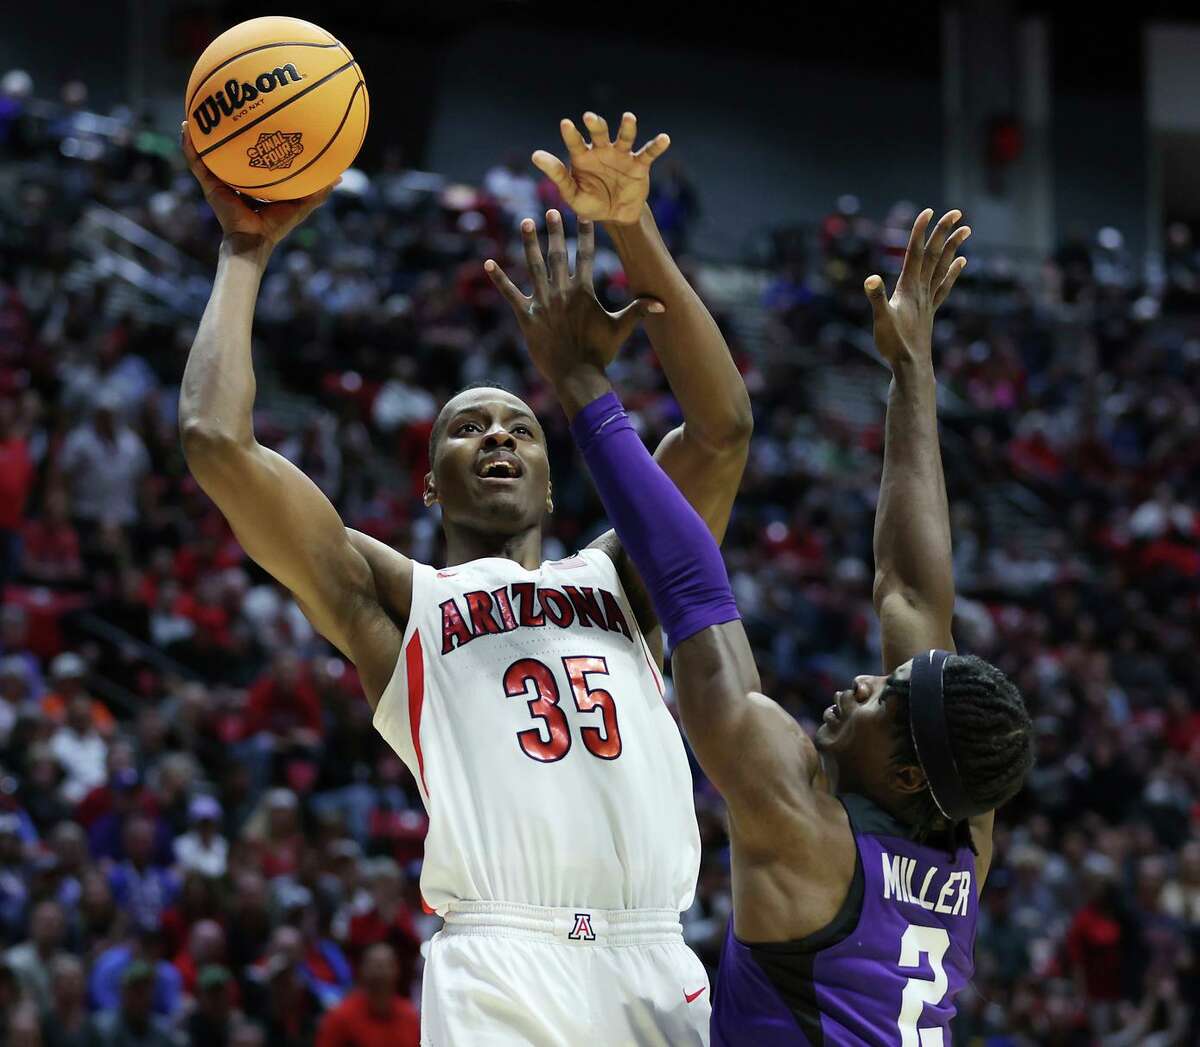 SAN DIEGO, CALIFORNIA - MARCH 20: Christian Koloko #35 of the Arizona Wildcats shoots the ball against Emanuel Miller #2 of the TCU Horned Frogs during the second half in the second round game of the 2022 NCAA Men's Basketball Tournament at Viejas Arena at San Diego State University on March 20, 2022 in San Diego, California. (Photo by Sean M. Haffey/Getty Images)